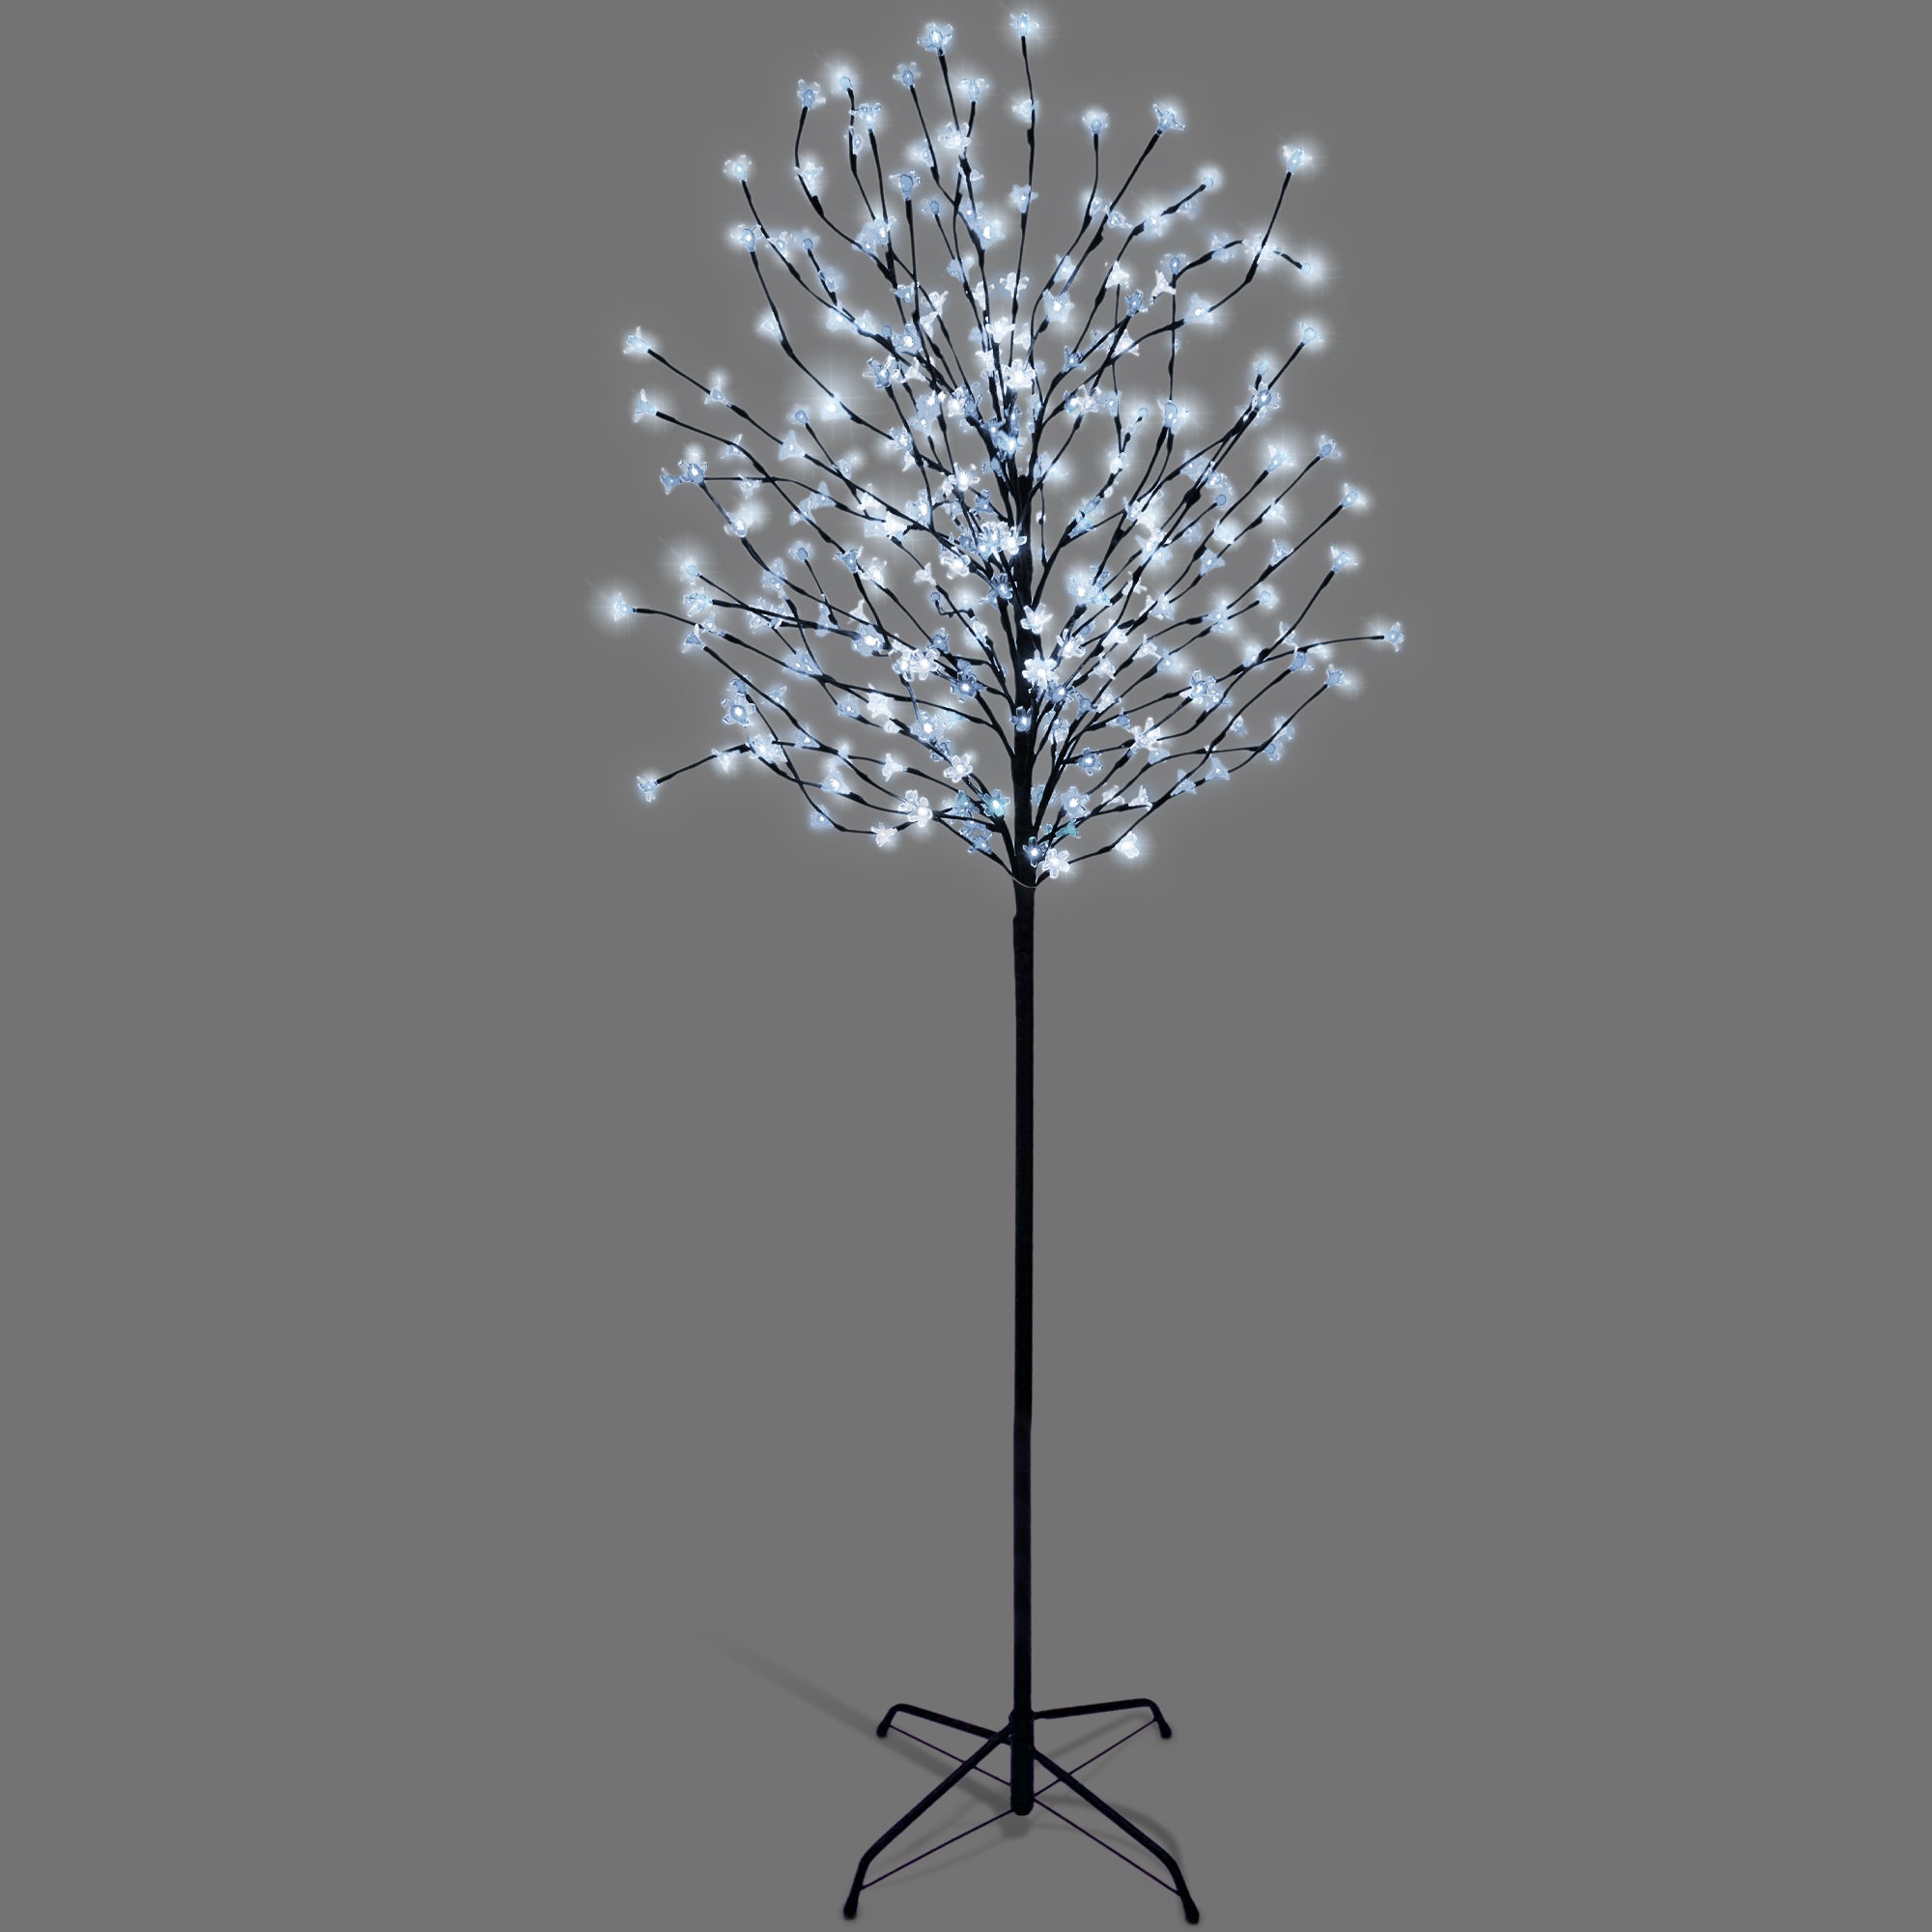 NETTA 5FT LED Cherry Blossom Tree, 250 Pre-Lit Lights, Auto-Off Timer and 8 Lighting Modes, 3M Power Cable, Suitable for Indoor and Outdoor Use - Cool White